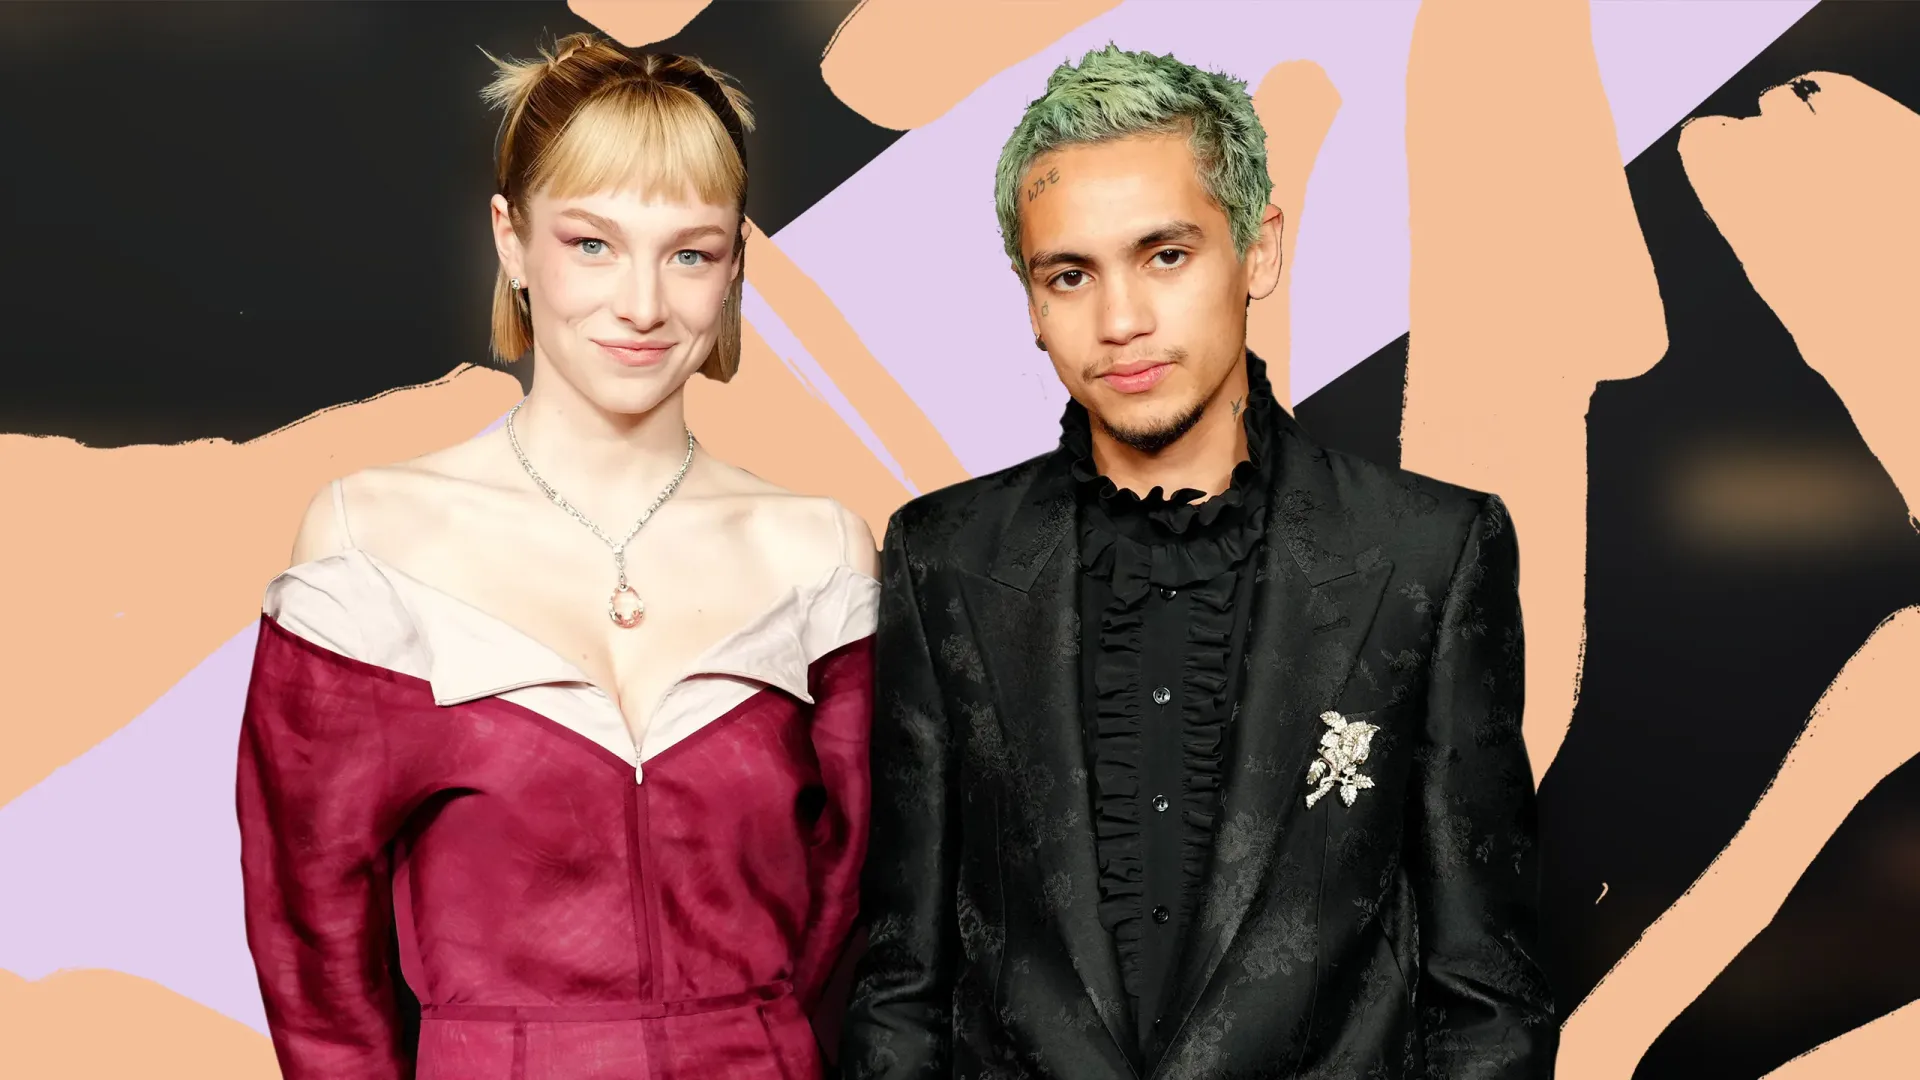 Hunter Schafer and Dominic Fike